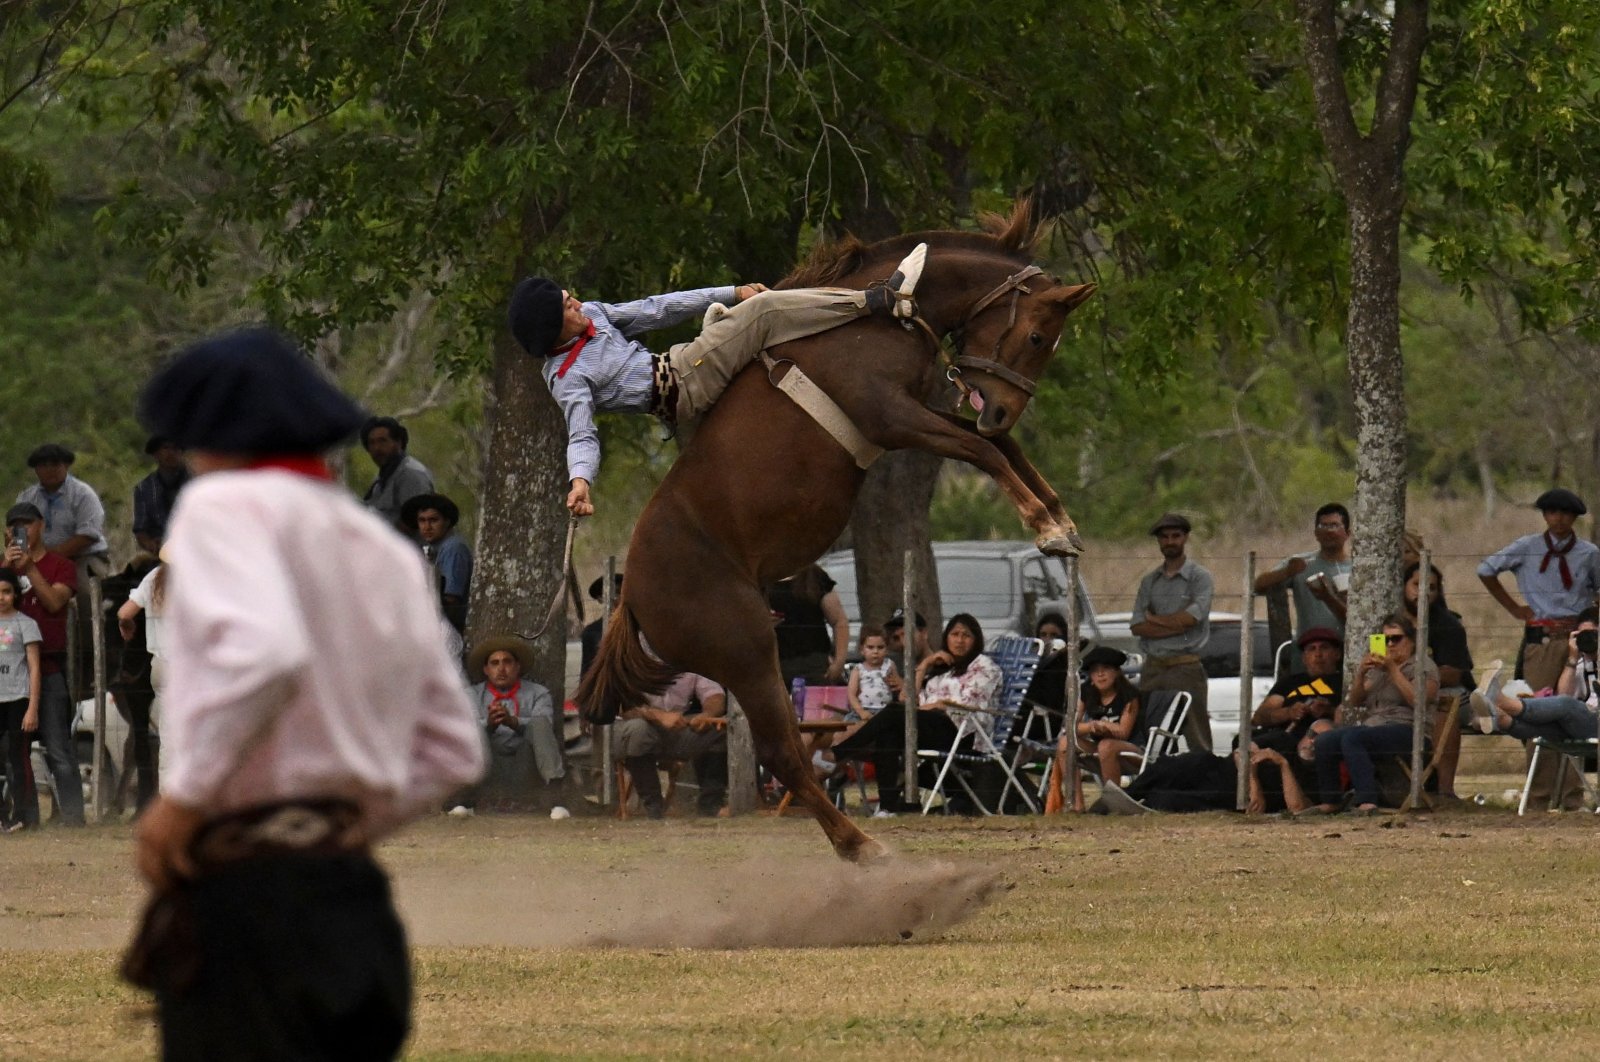 A gaucho falls from a colt at a rodeo exhibition during the 83rd Tradition Festival in San Antonio de Areco, Argentina, Nov. 12, 2022. (AFP Photo)